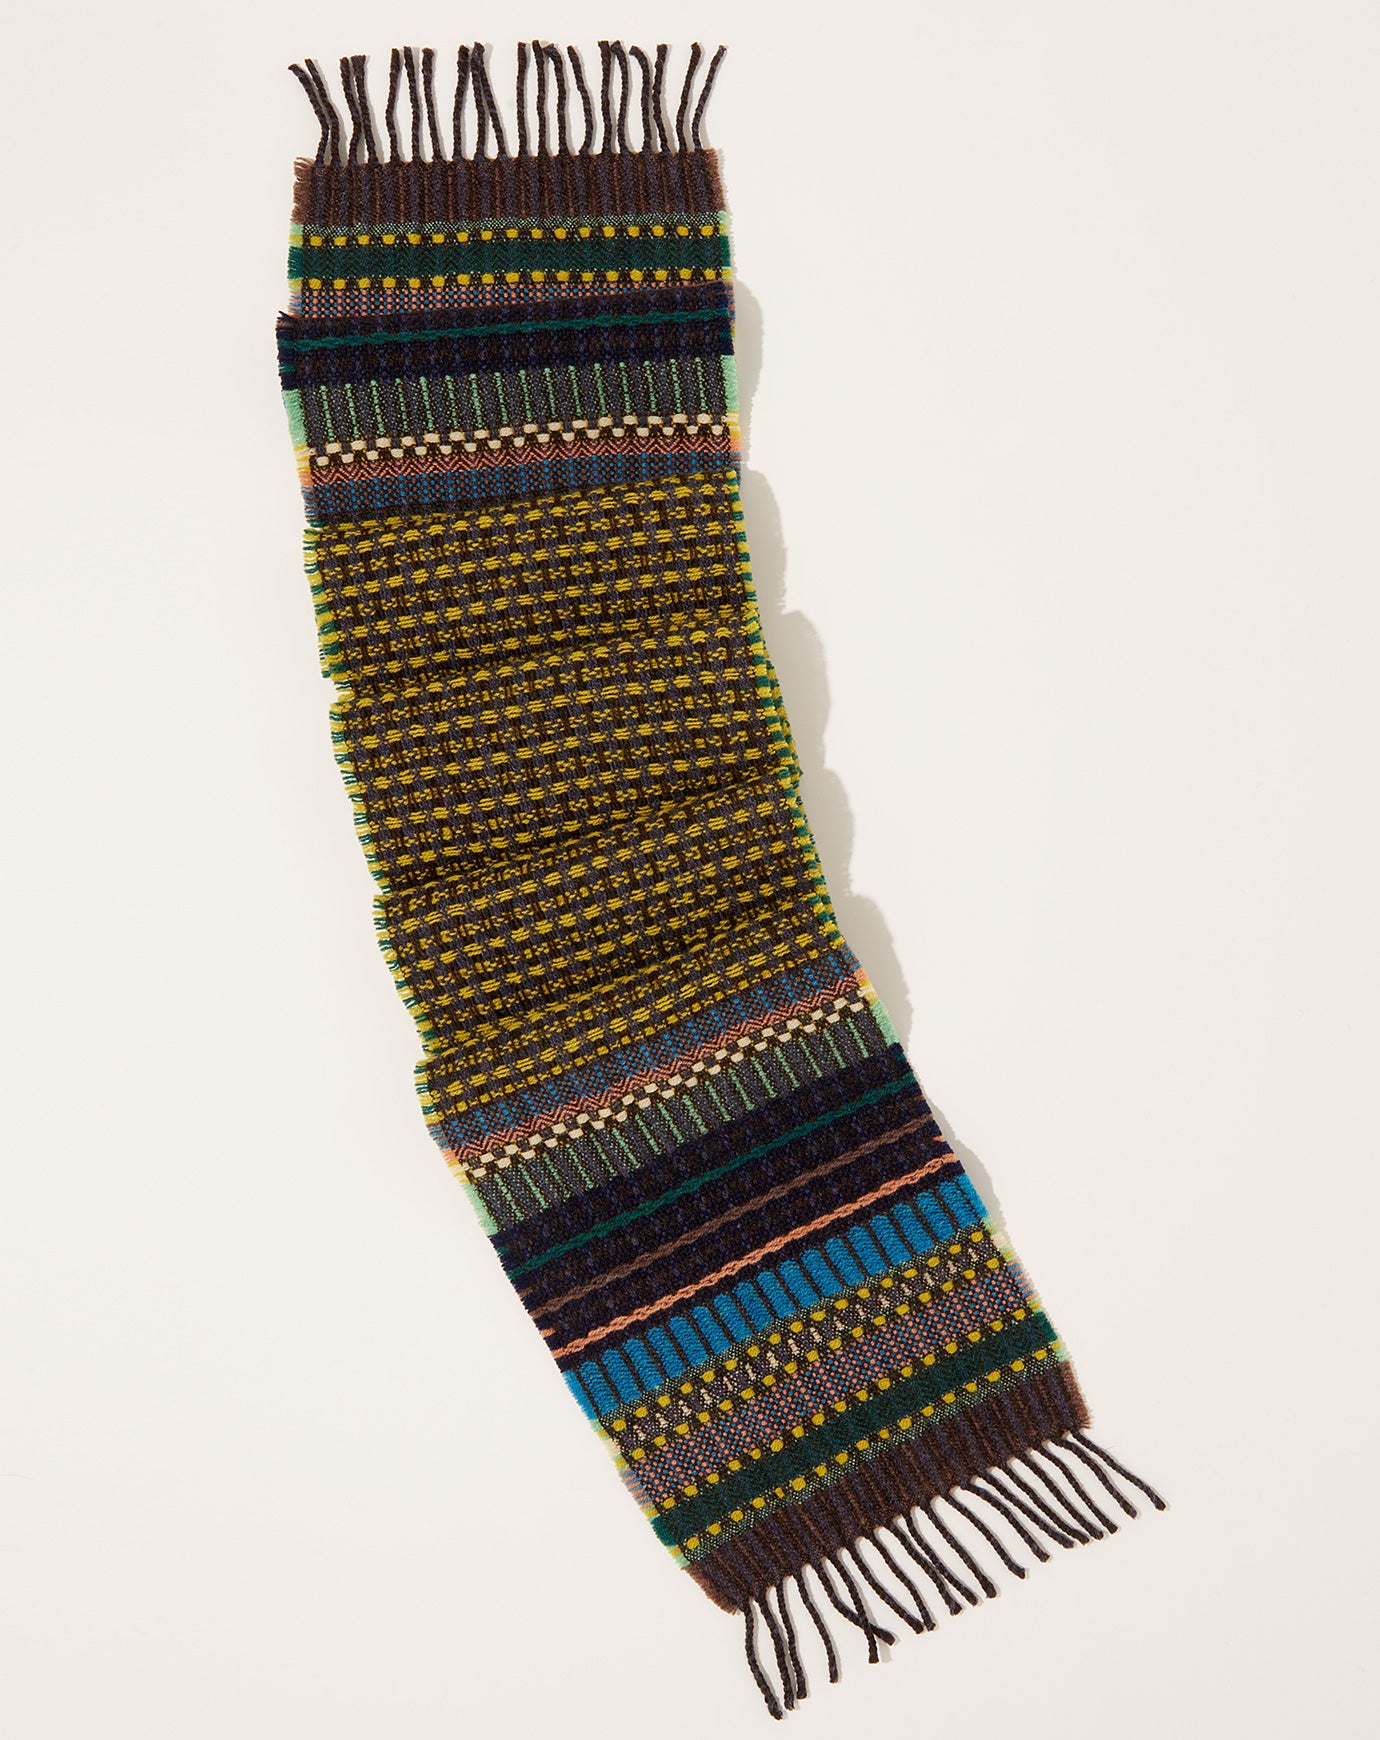 Wallace Sewell Fremont Scarf in Parakeet